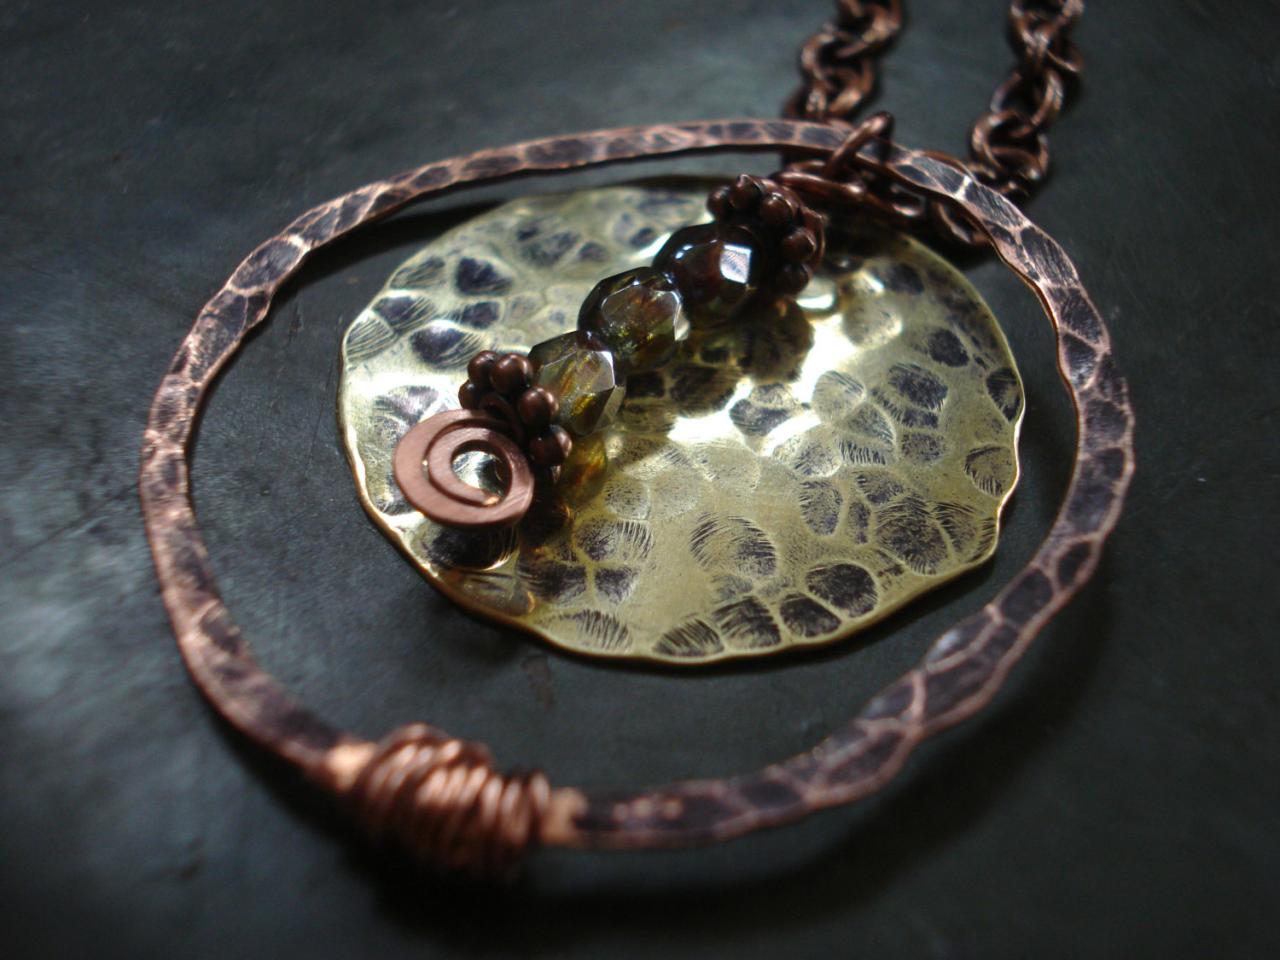 Handmade Necklace, Hammered Copper Necklace, Copper Jewelry, Statement Necklace